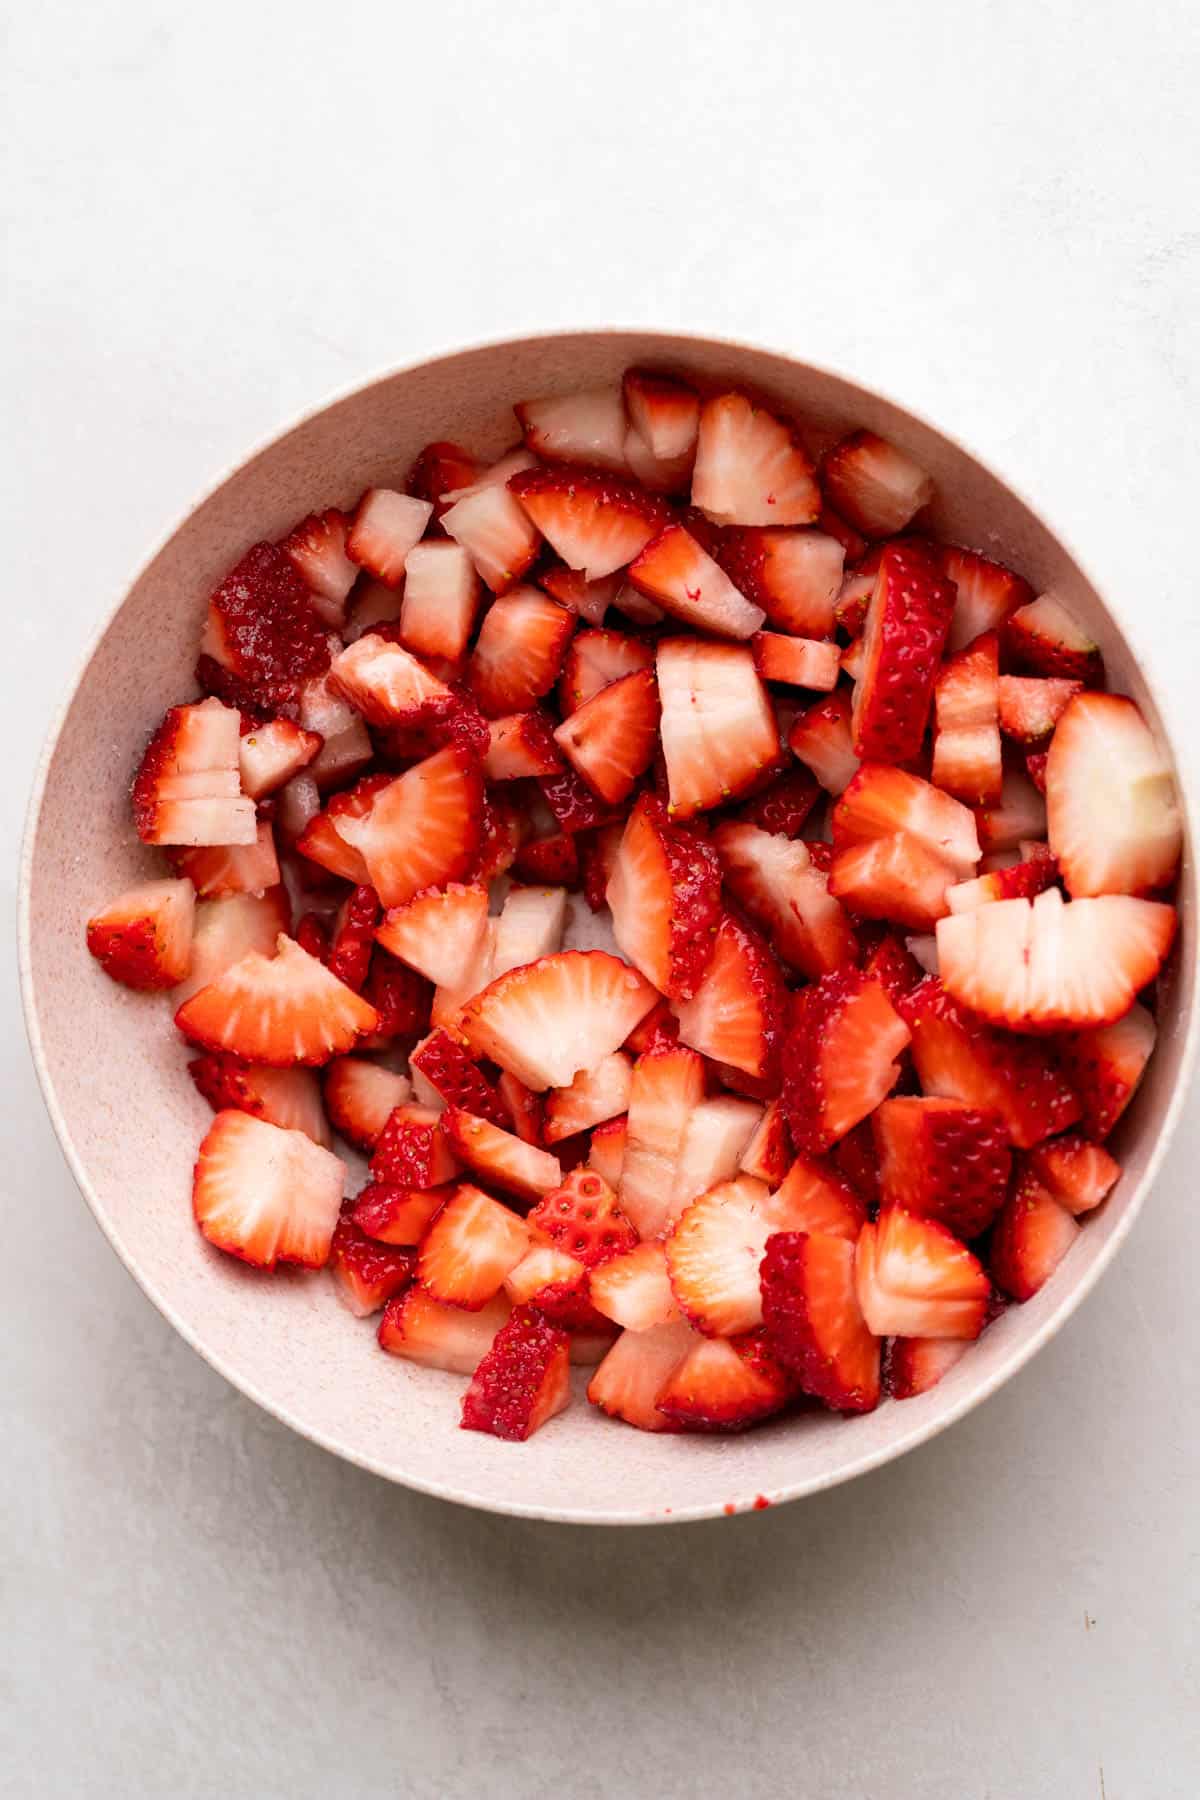 Diced strawberries in a bowl.